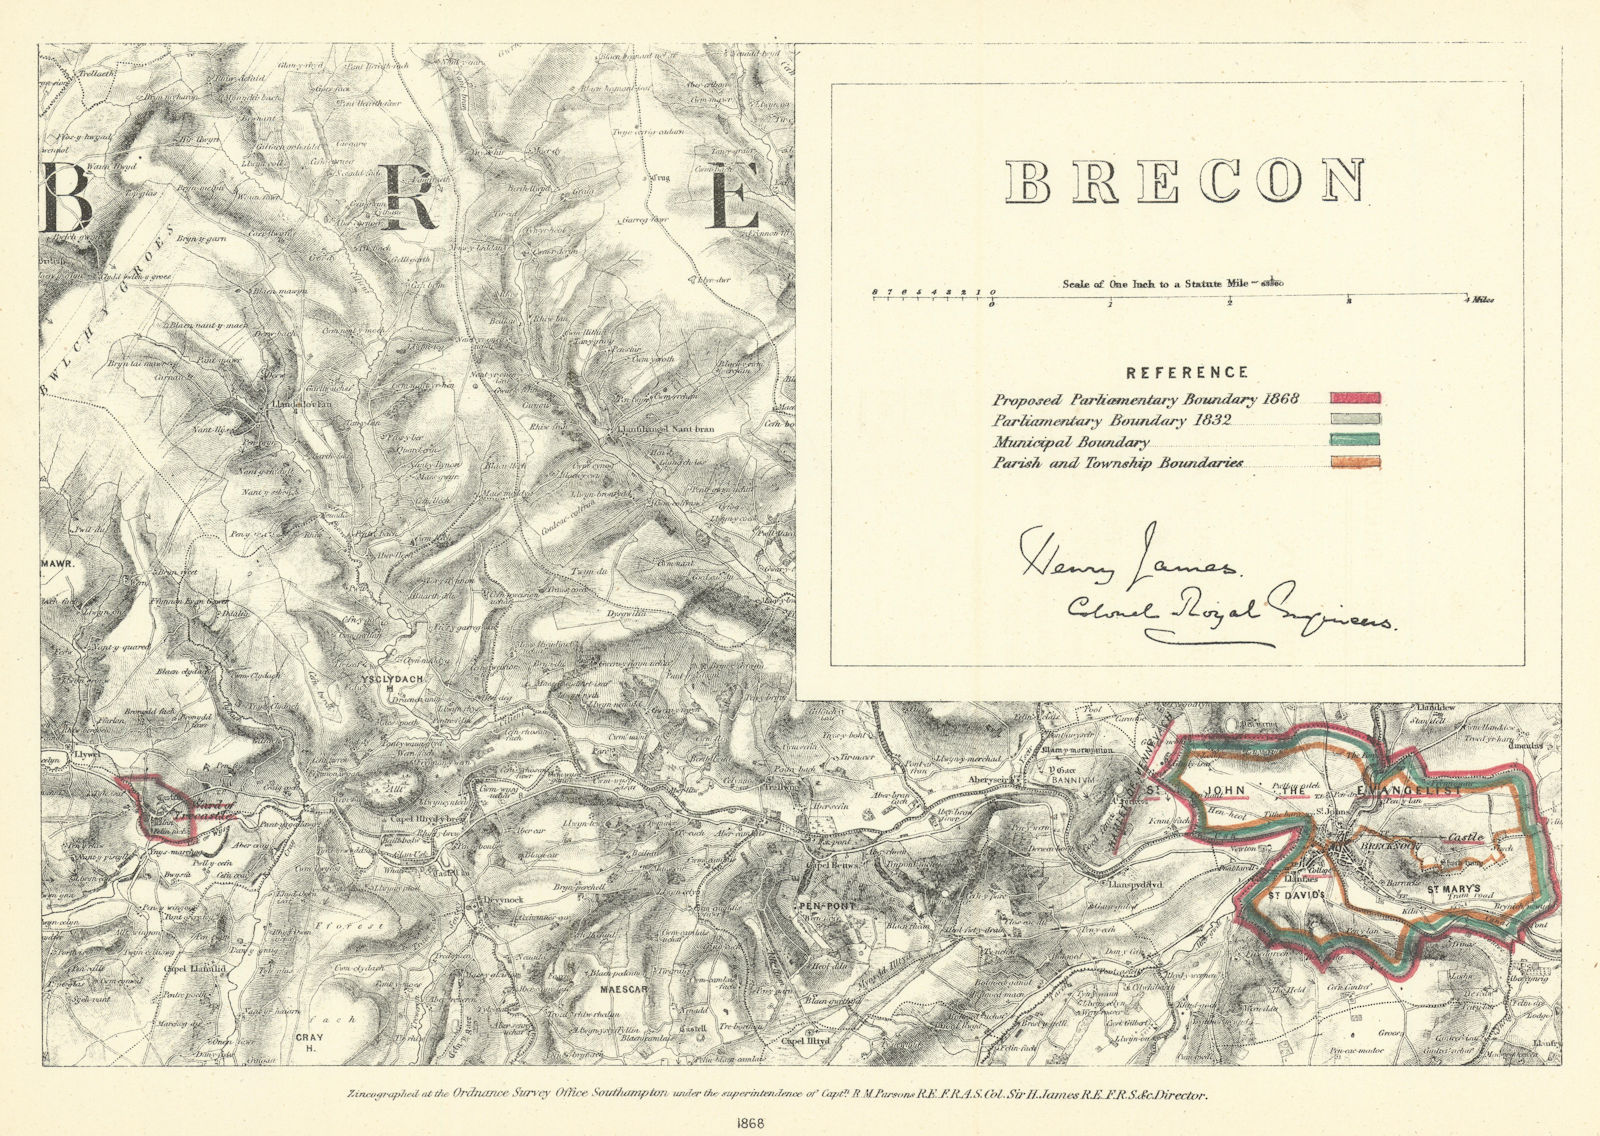 Brecon, Brecknockshire. JAMES. Parliamentary Boundary Commission 1868 old map